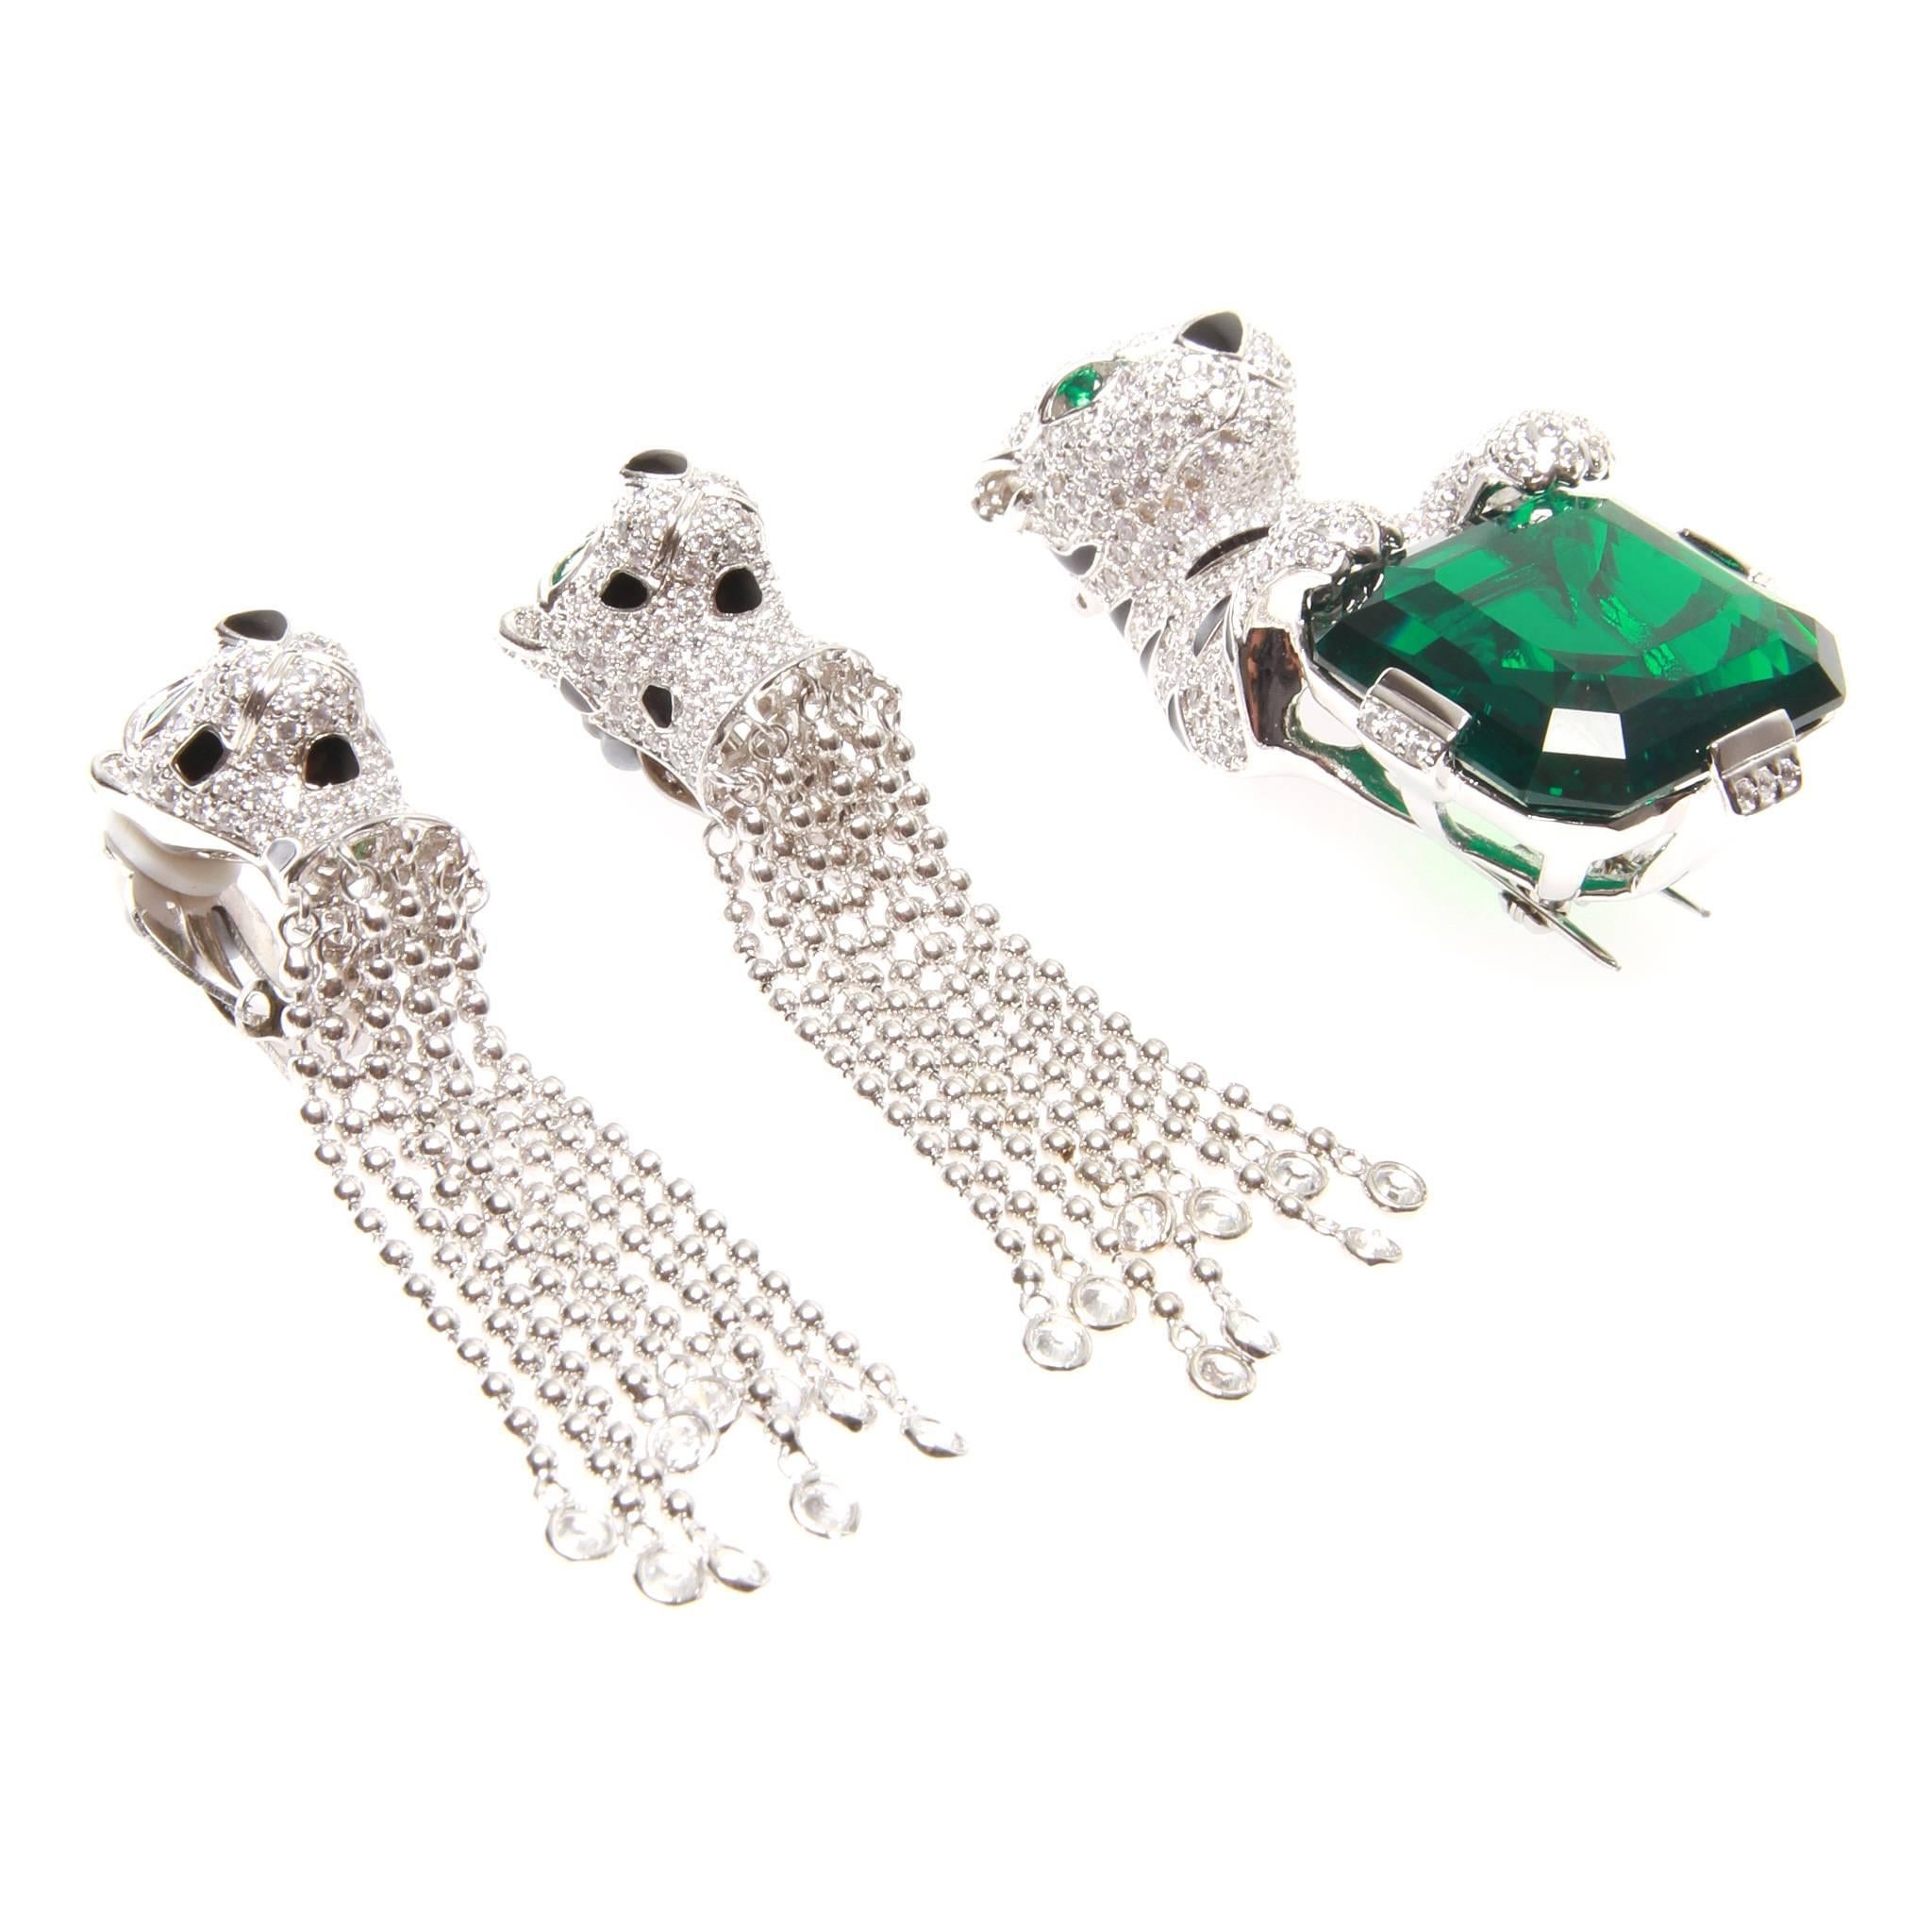 A stunning Jarin sterling silver leopard earring and brooch jewellery set.

It features a pair of sterling silver Leopard dangle earrings and leopard brooch, embellished with a large and beautiful Green cubic zirconia.

Dress up with a black